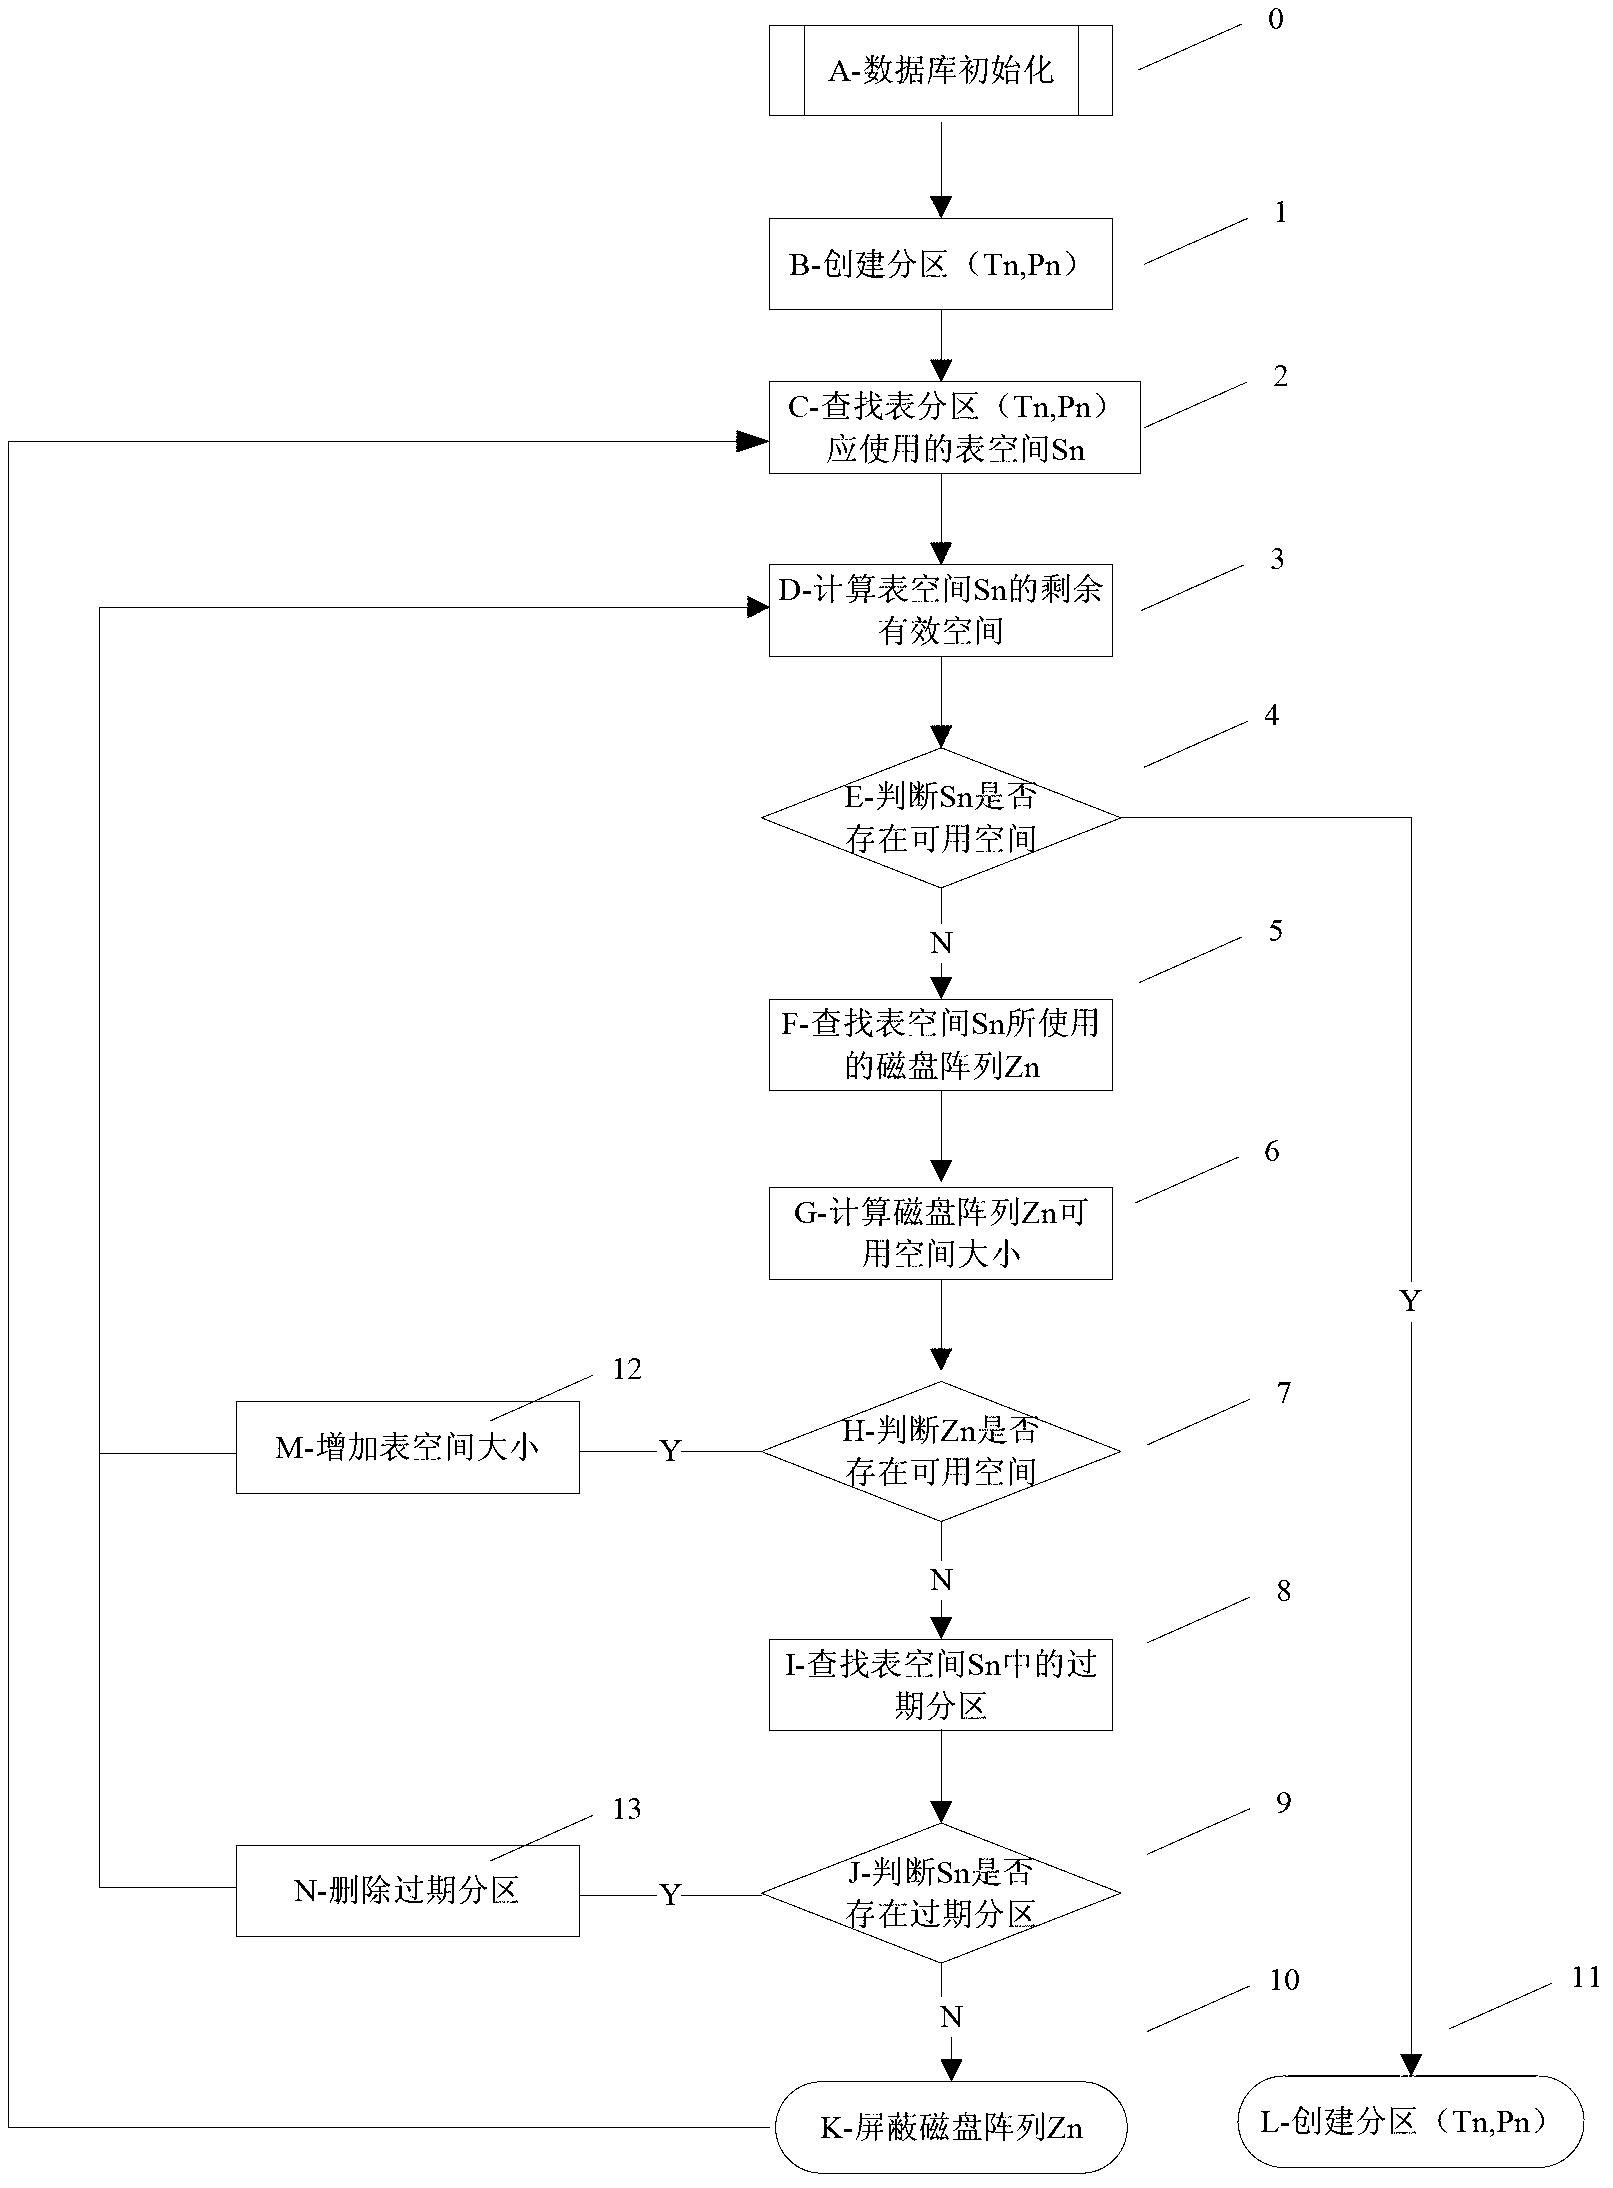 Mobile internet data storage system based on interlaced time partition and method thereof